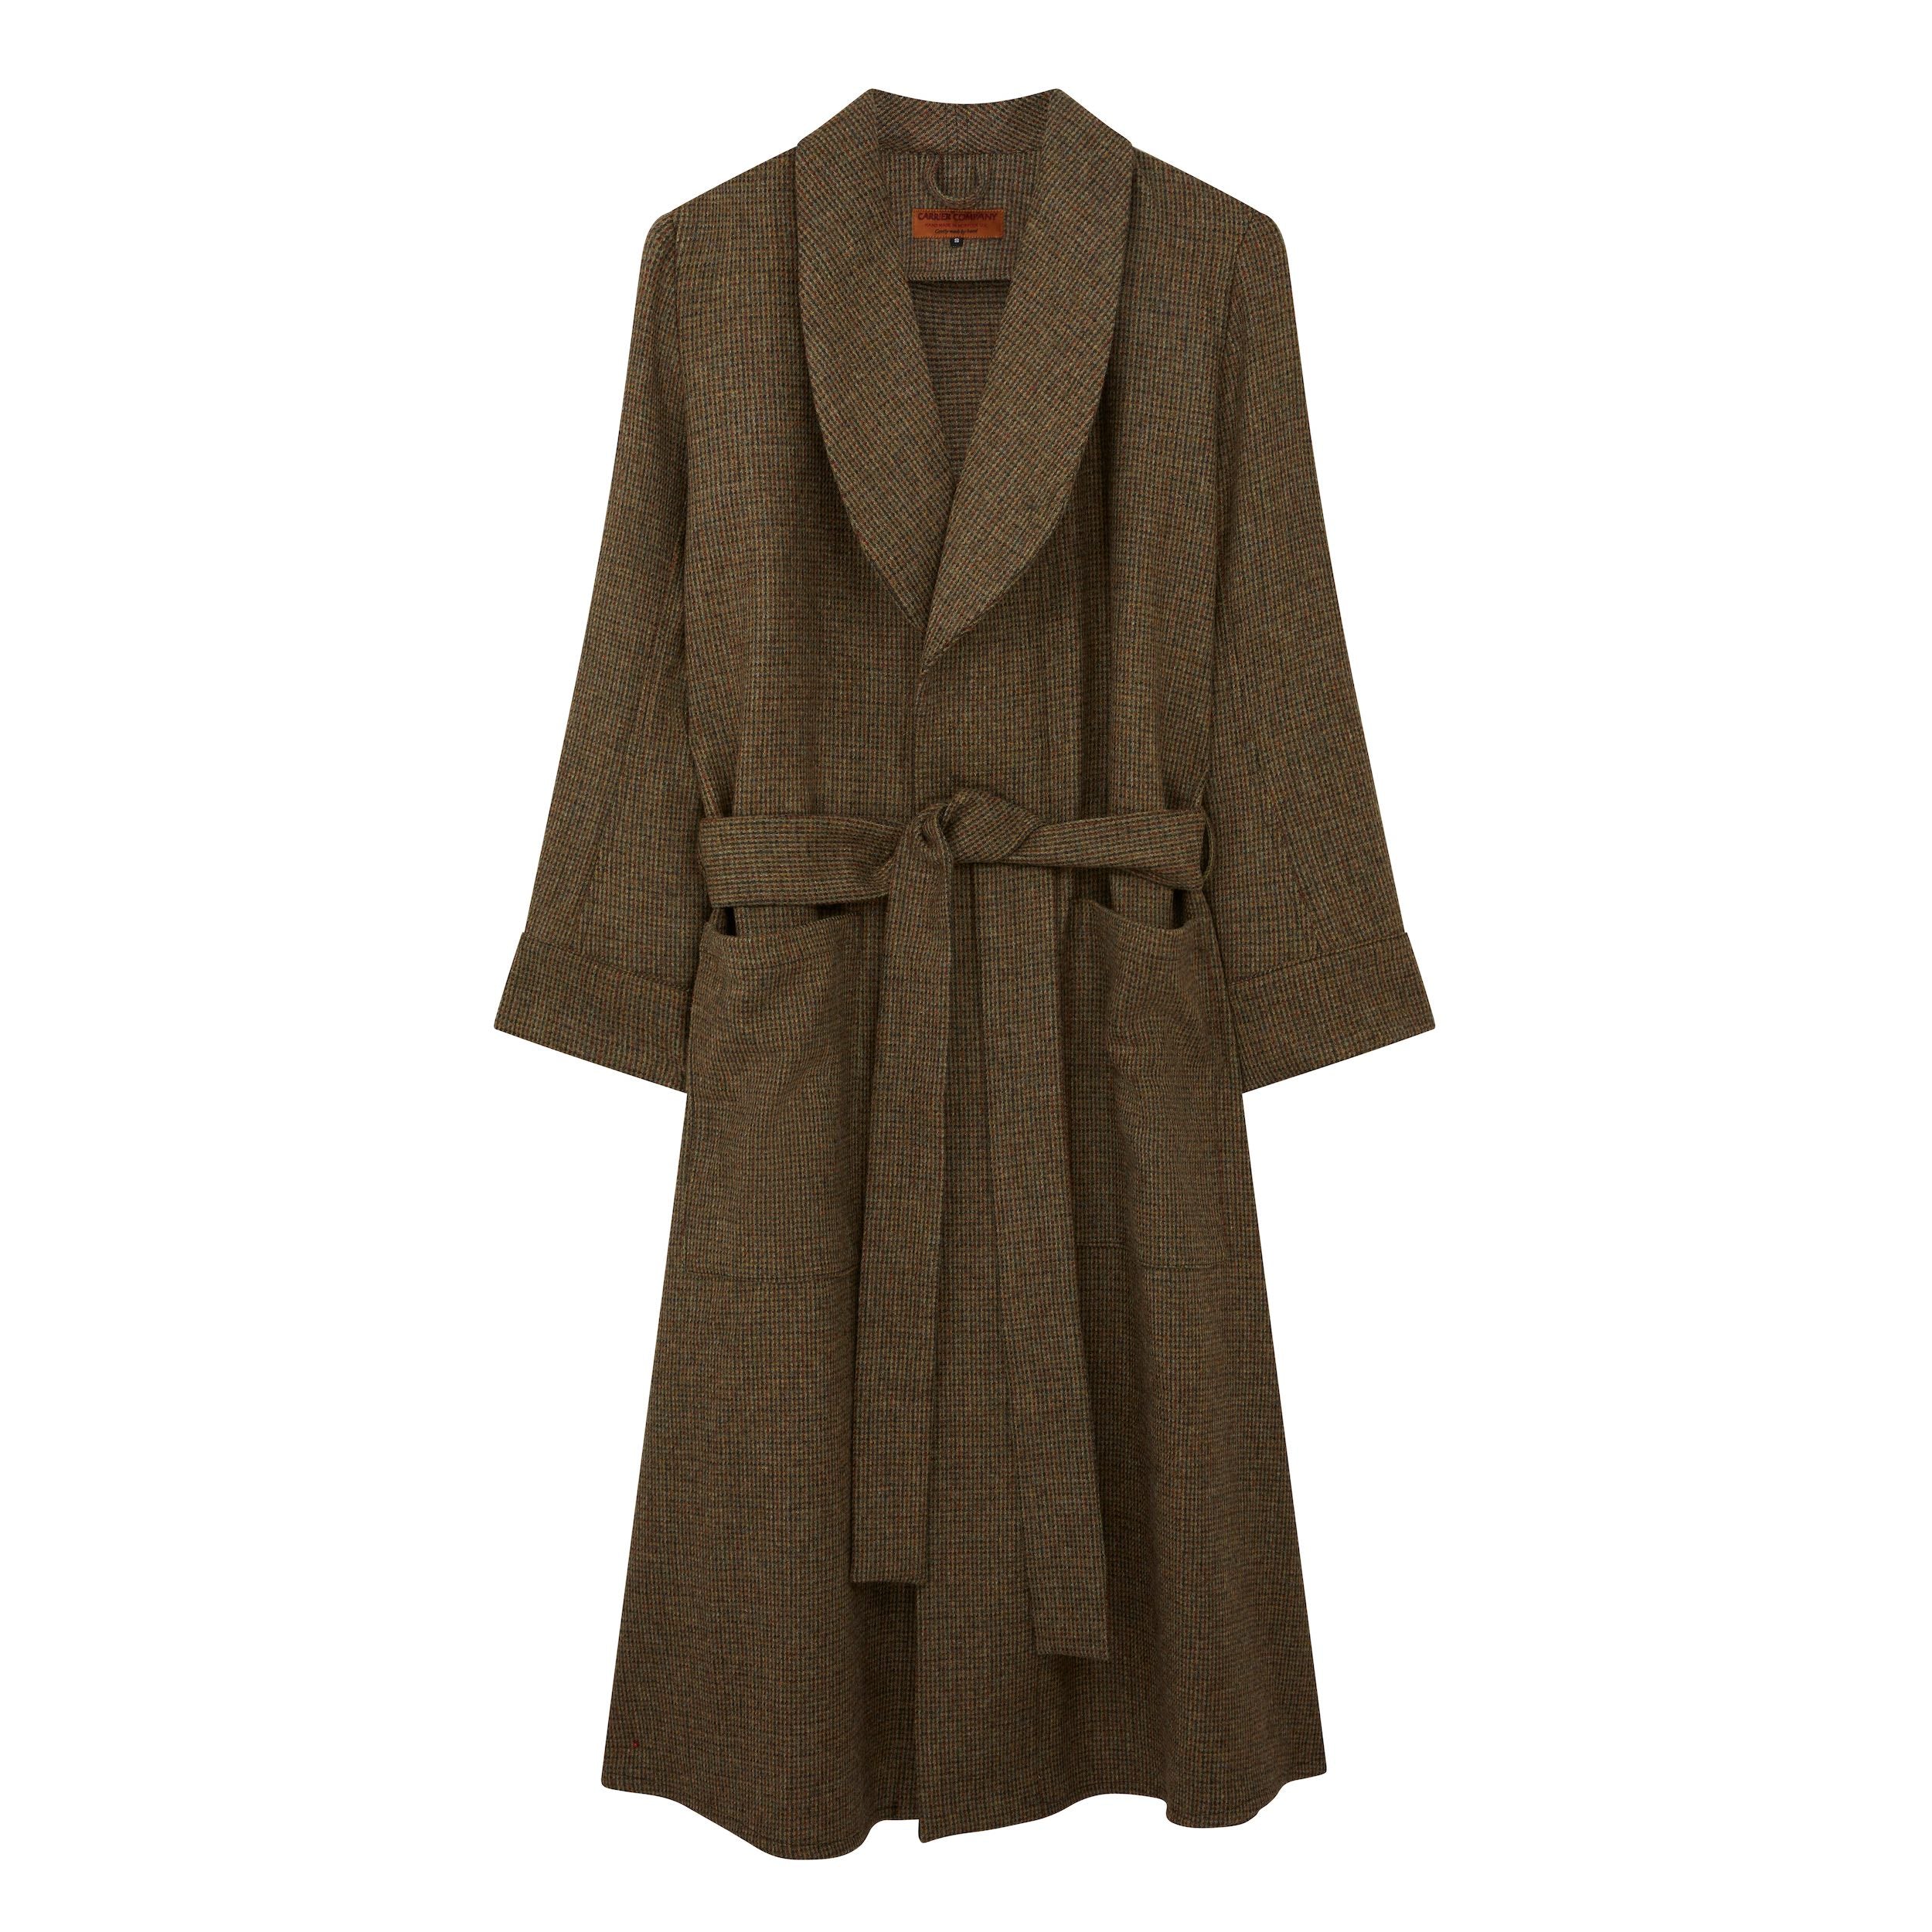 Carrier Company Wool Dressing Gown in Green Check